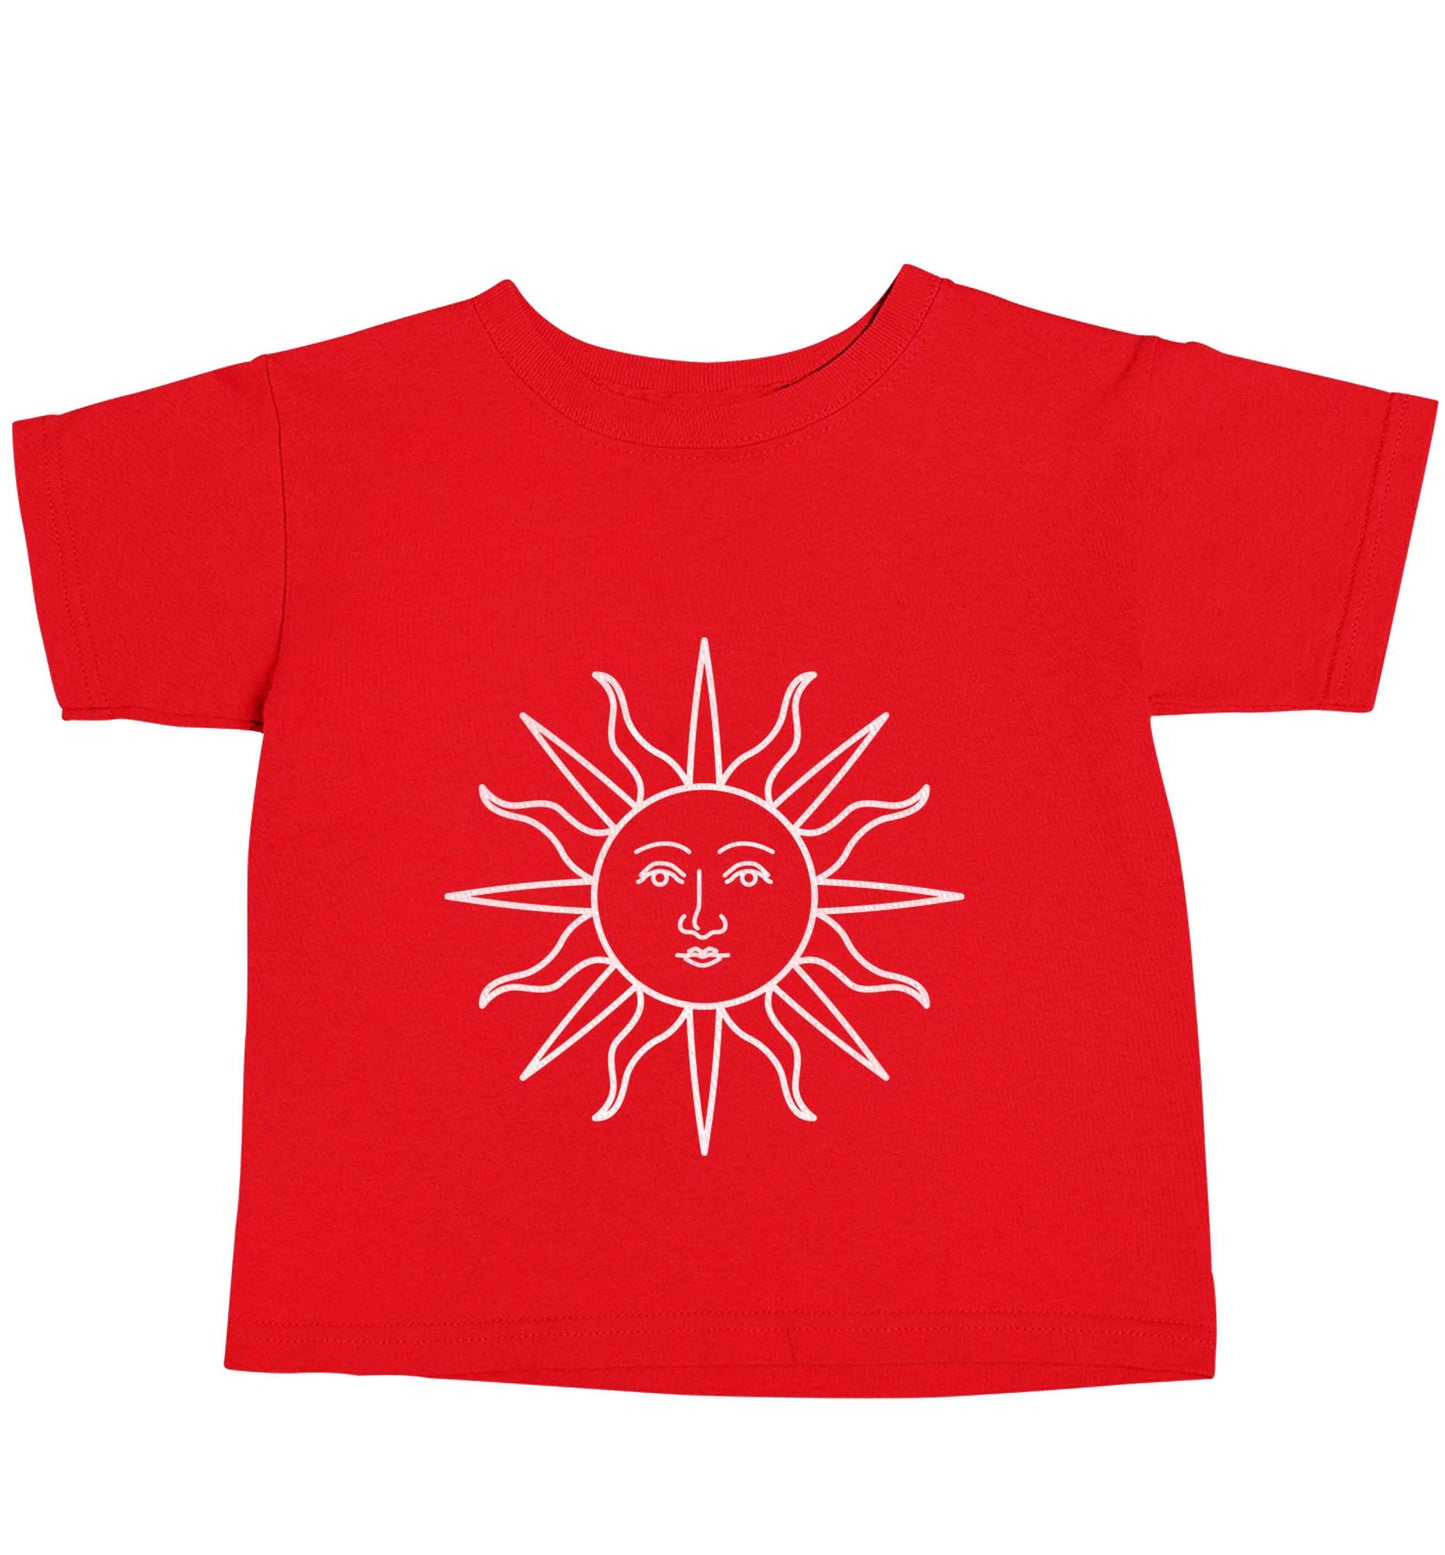 Sun face illustration red baby toddler Tshirt 2 Years